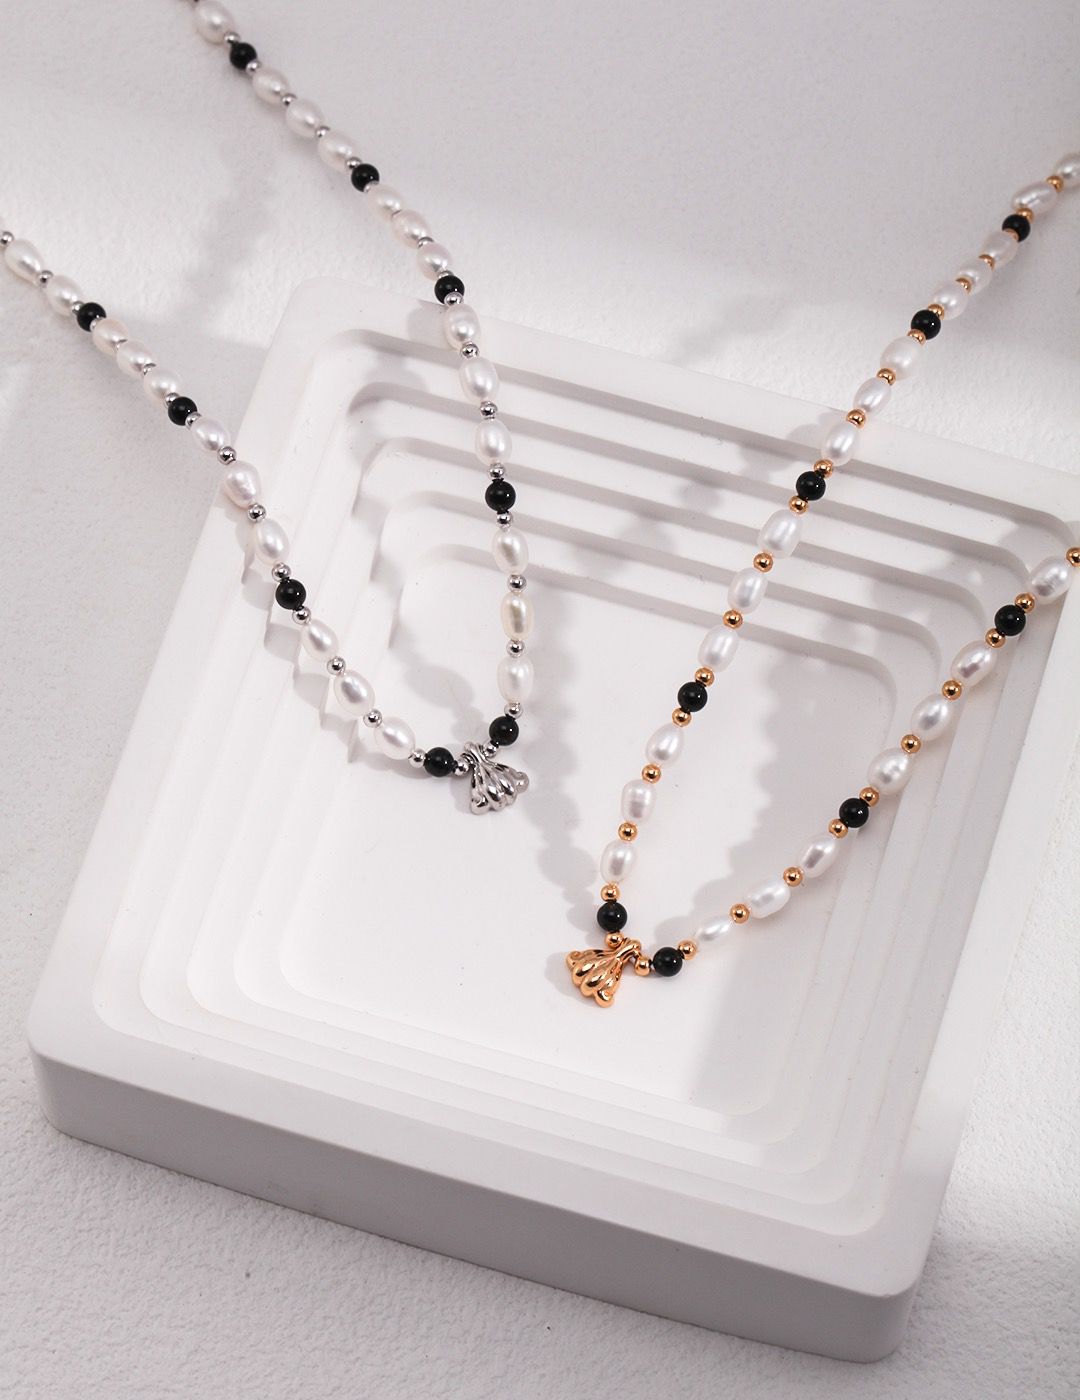 Handcrafted Pearl and Agate Necklace with Freshwater Pearls and Agate Stones